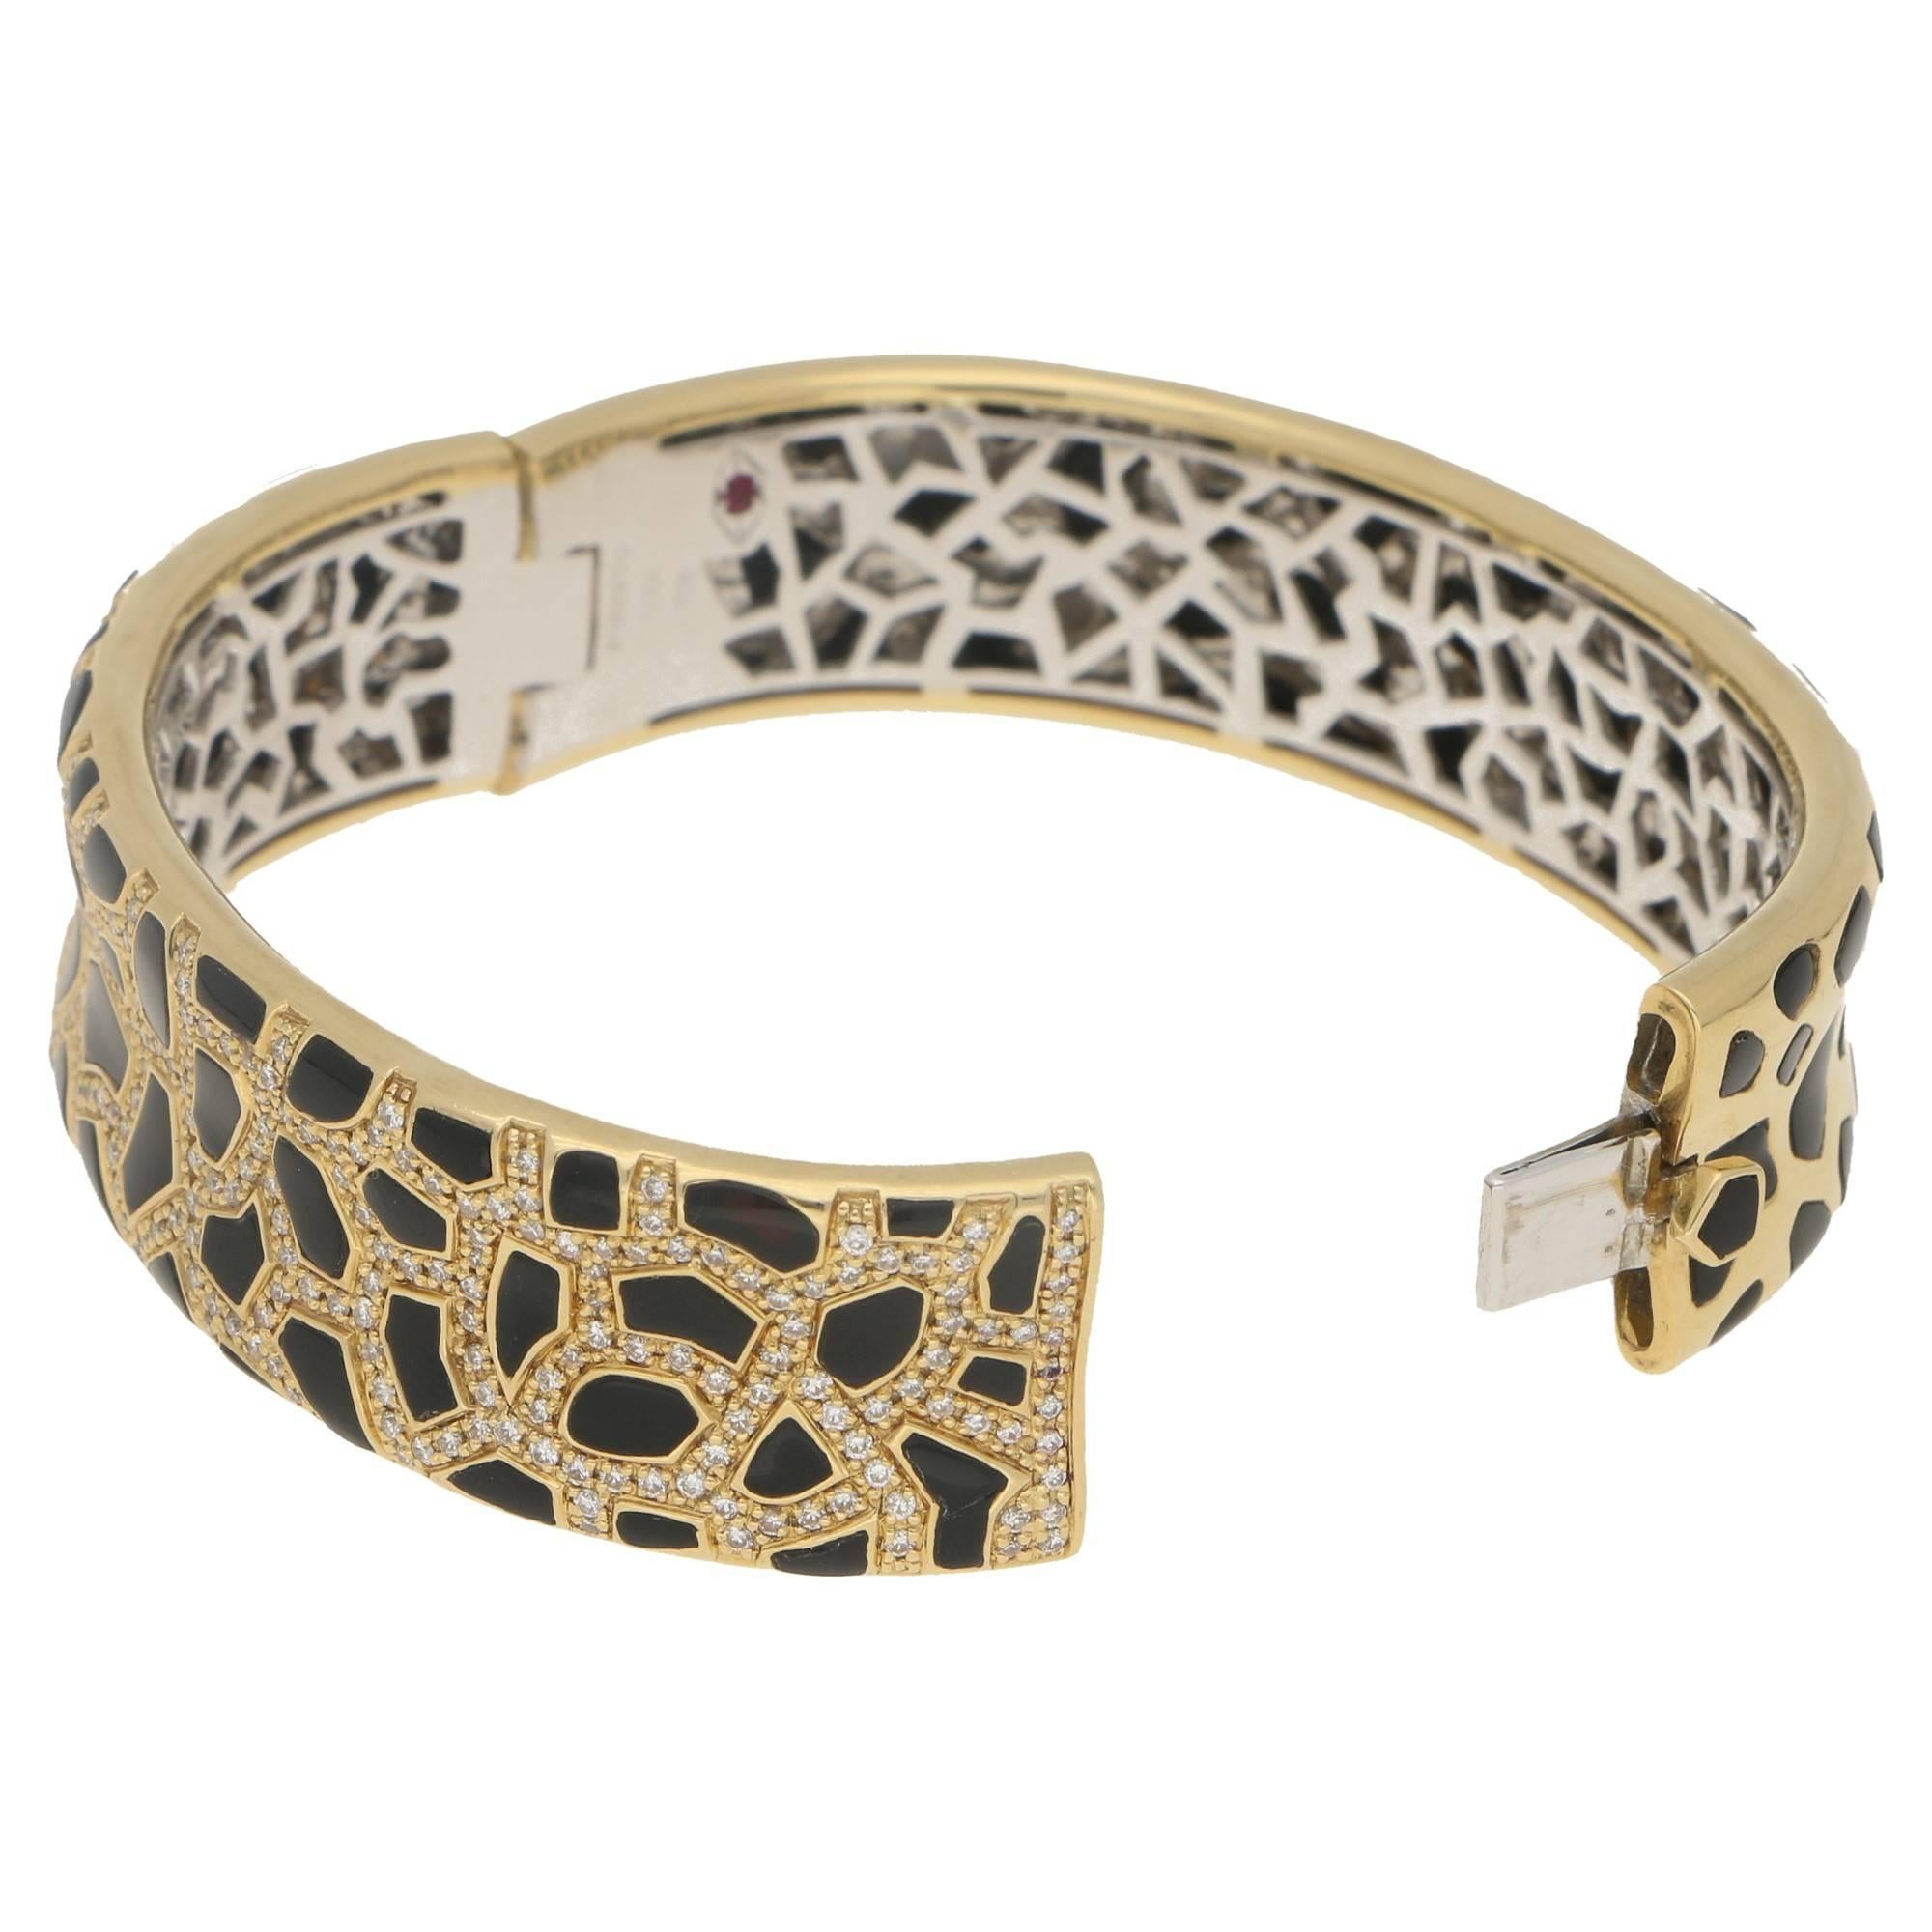 A stunning leopard print design Roberto Coin 18ct yellow gold hinged bangle, set with diamonds and onyx from his Animalier collection. The onyx is set into the gold as leopard spots and on the front the space in between the onyx is pave set with